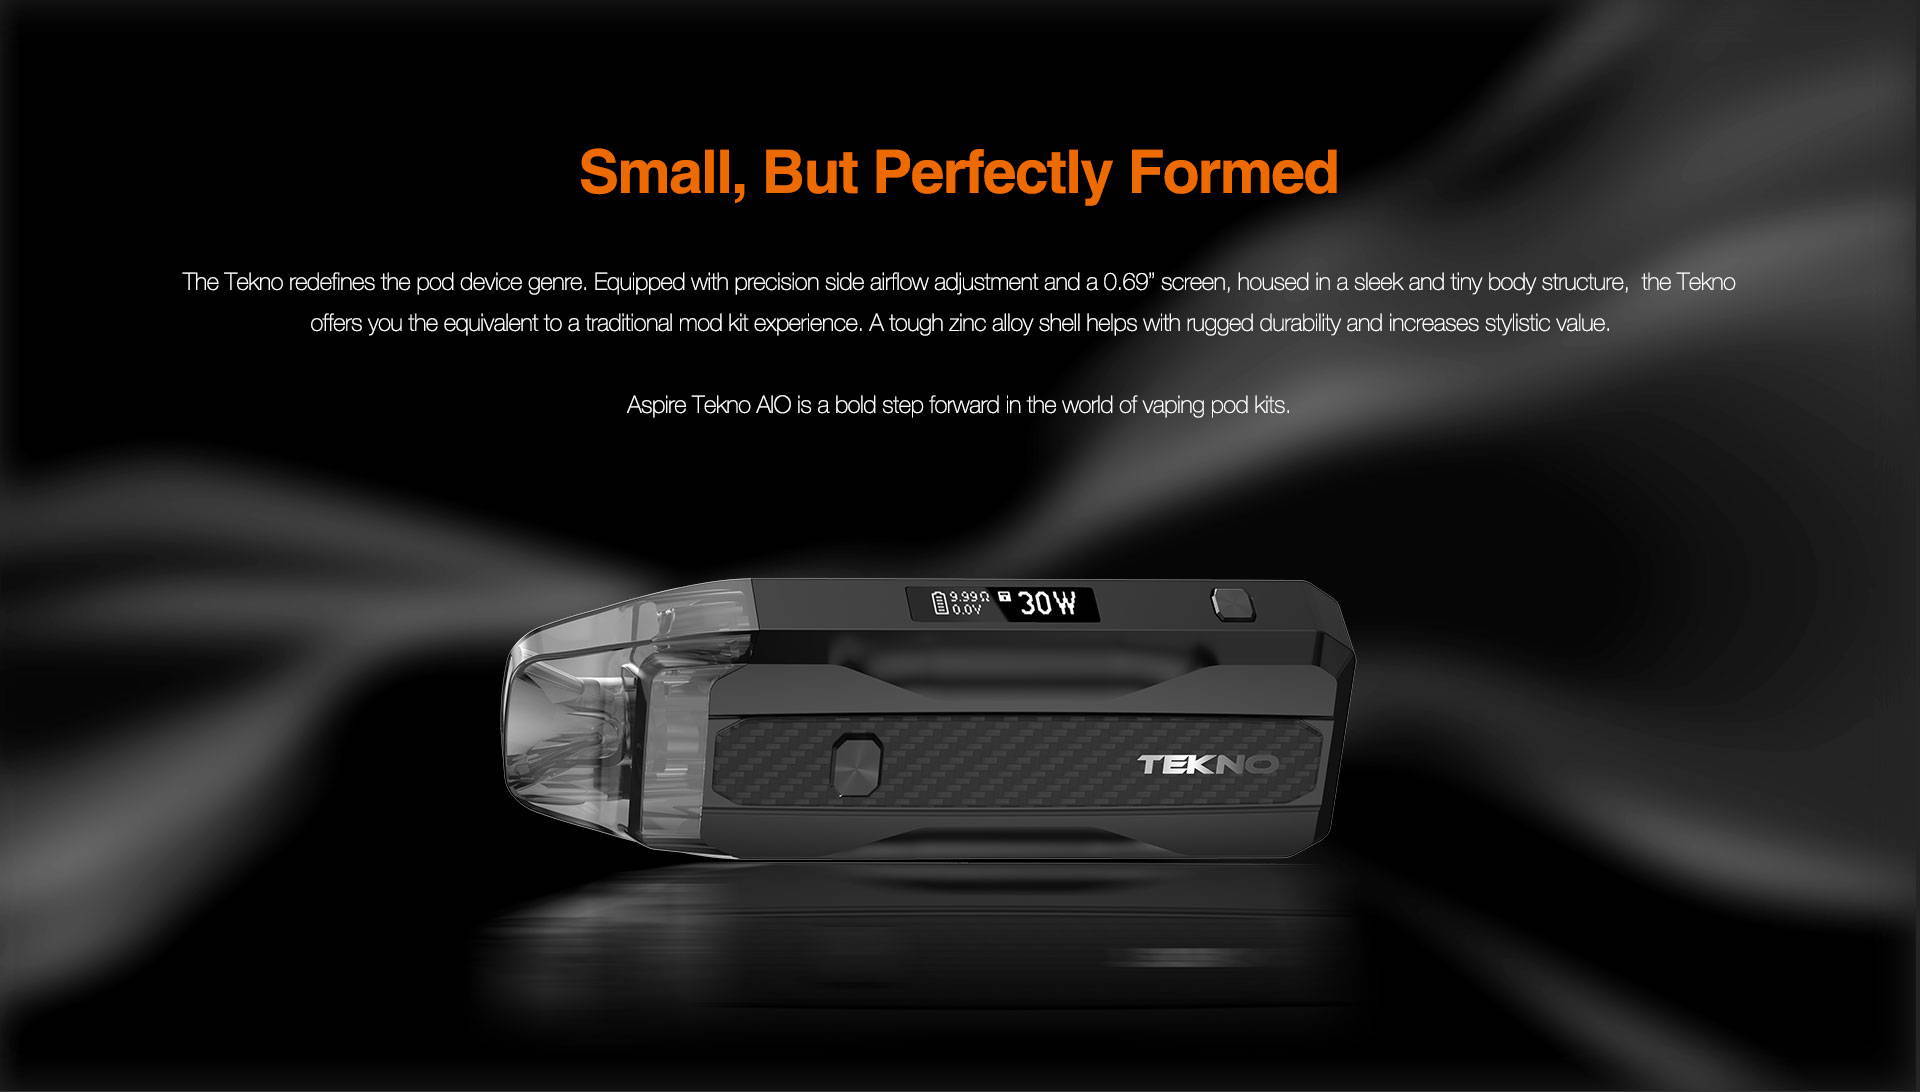 Though Small, Perfectly Formed  The Tekno redefines the pod device genre. Equipped with precision side airflow adjustment and a 0.69” screen, housed in a sleek and tiny body structure, offering you the equivalent to a traditional mod kit experience. A tough zinc alloy shell helps with rugged durability and increases stylistic value. Aspire Tekno AIO pod changes the expectations of pod device vapers rapidly.